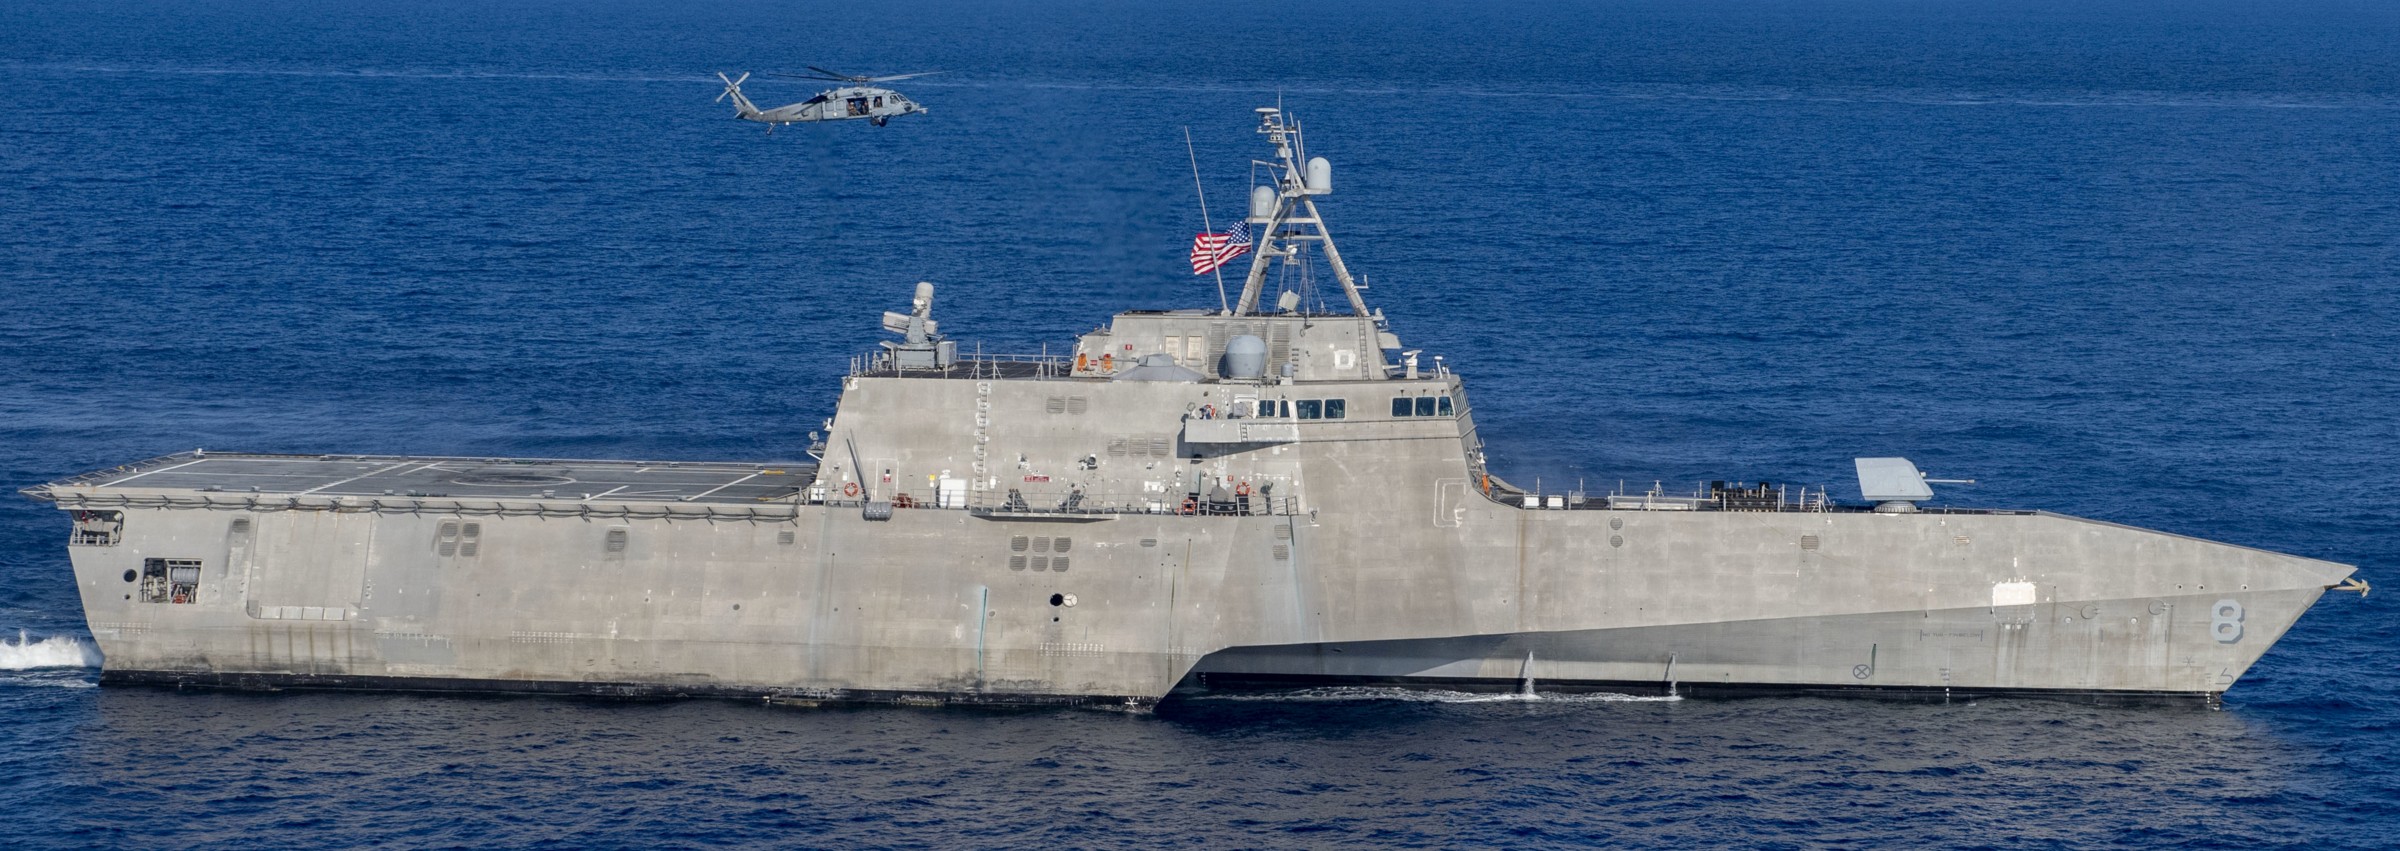 lcs-8 uss montgomery independence class littoral combat ship us navy 21